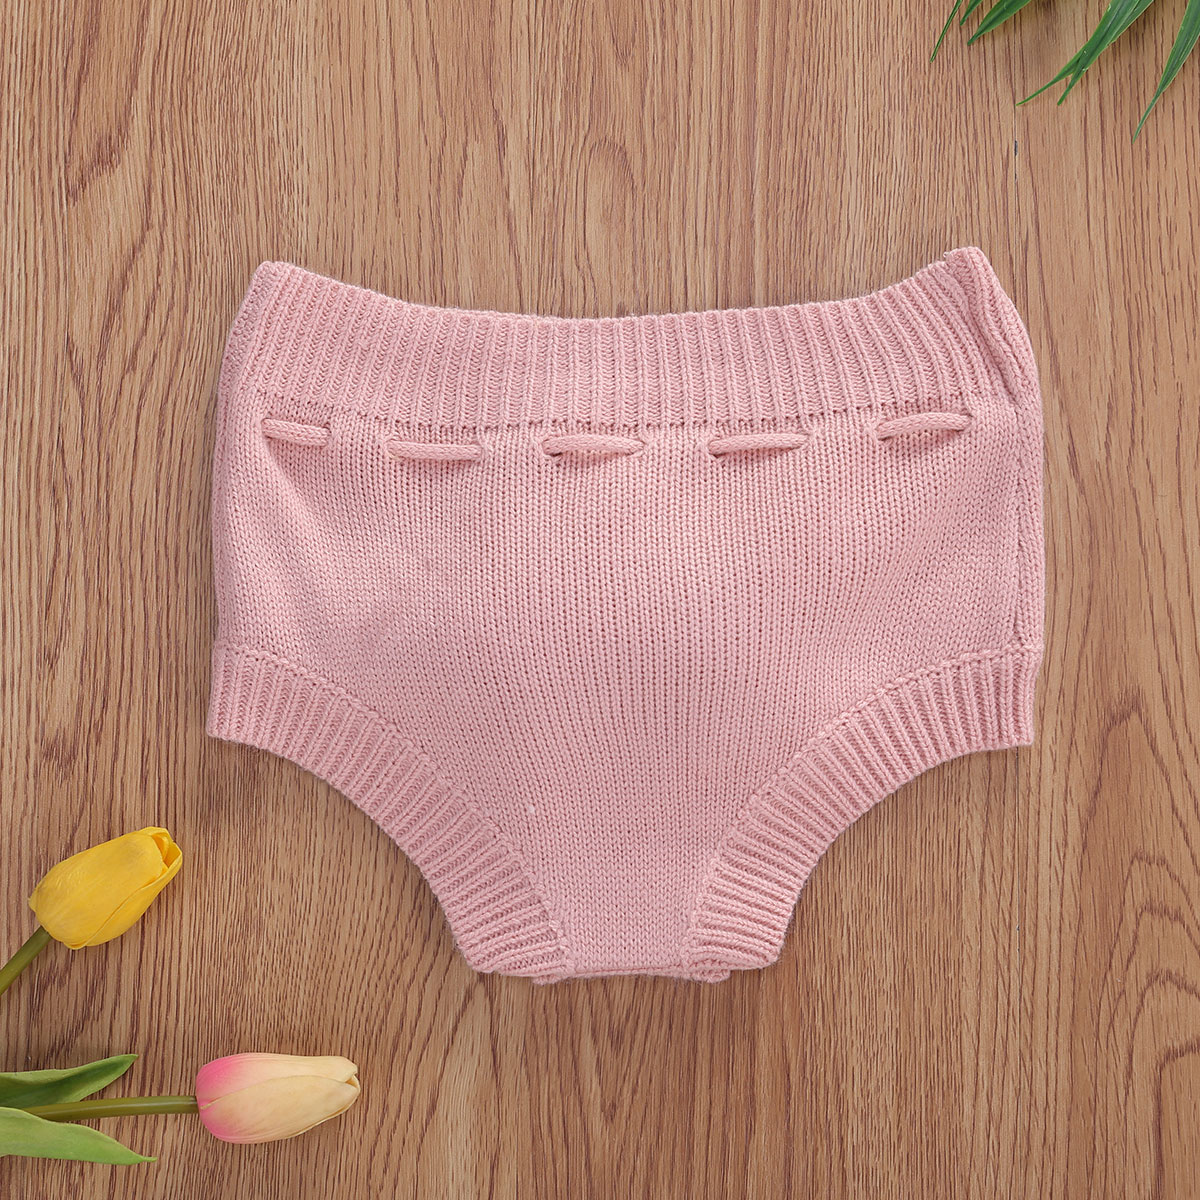 2020 0-18M Cute Infant Baby Girls Shorts Autumn Winter New Knited Solid Color Plush ball Triangle Shorts Bottoms